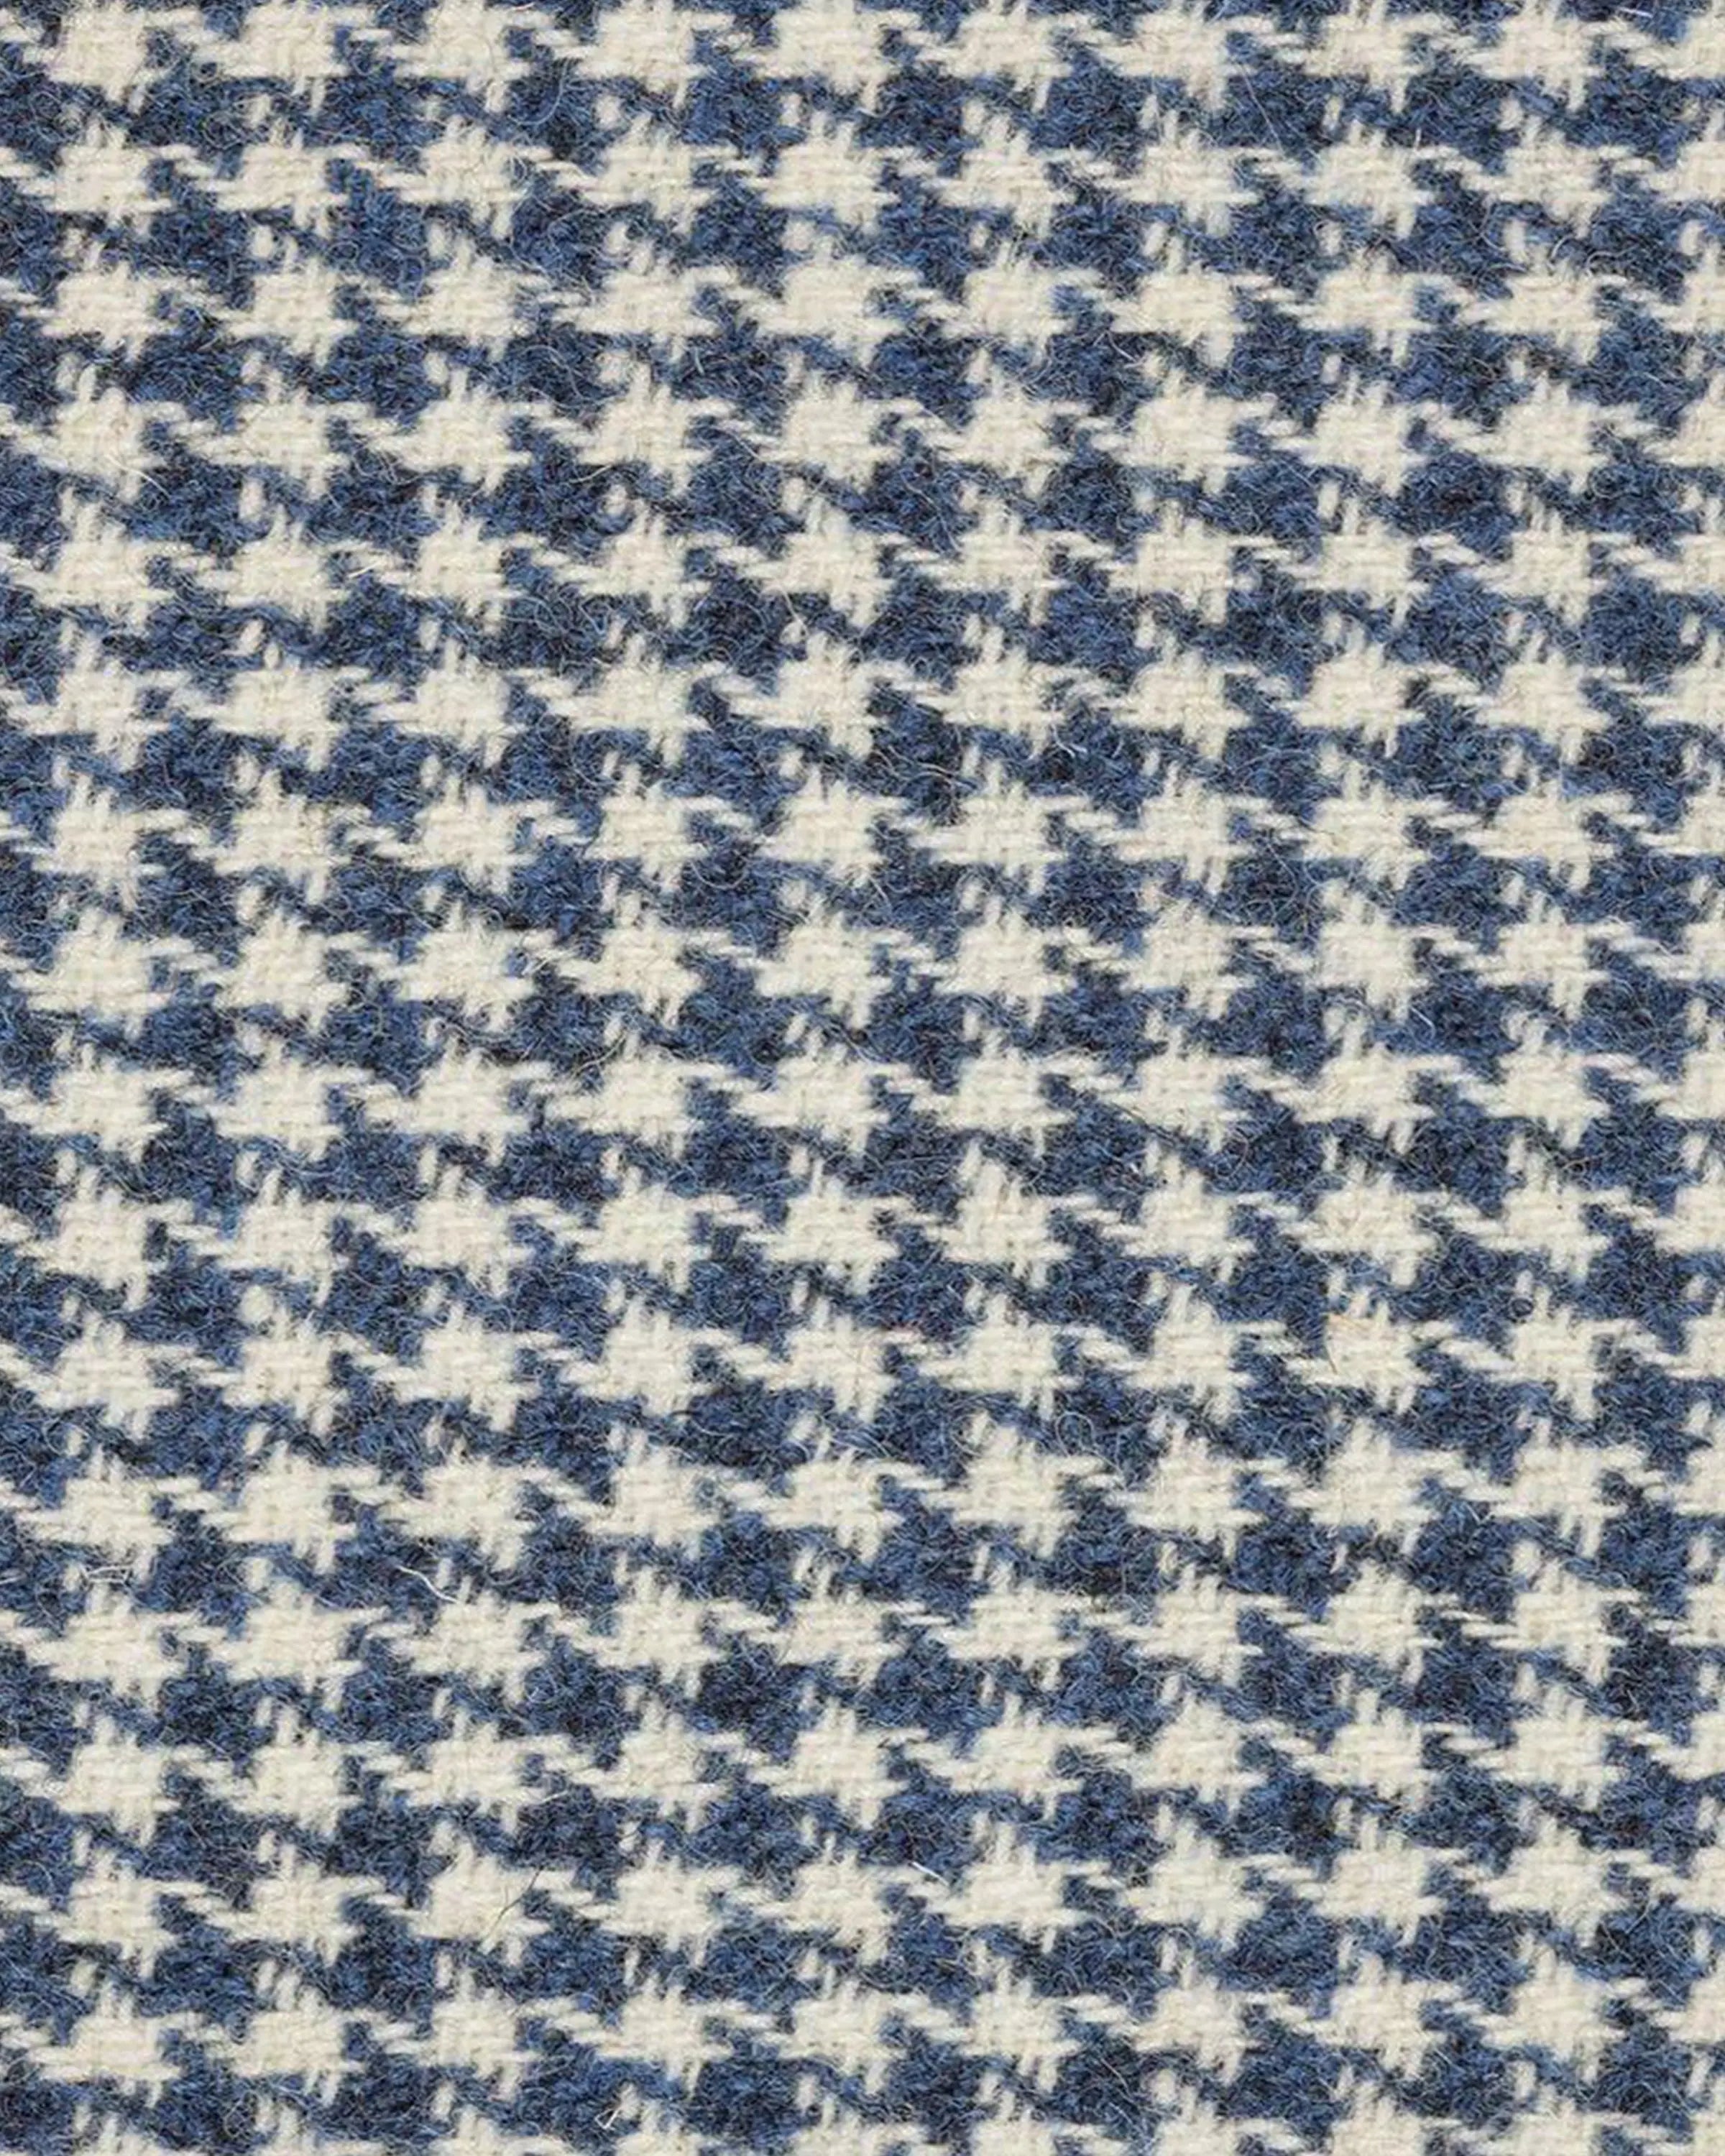 Chia Blue & White Houndstooth Pattern Fabric